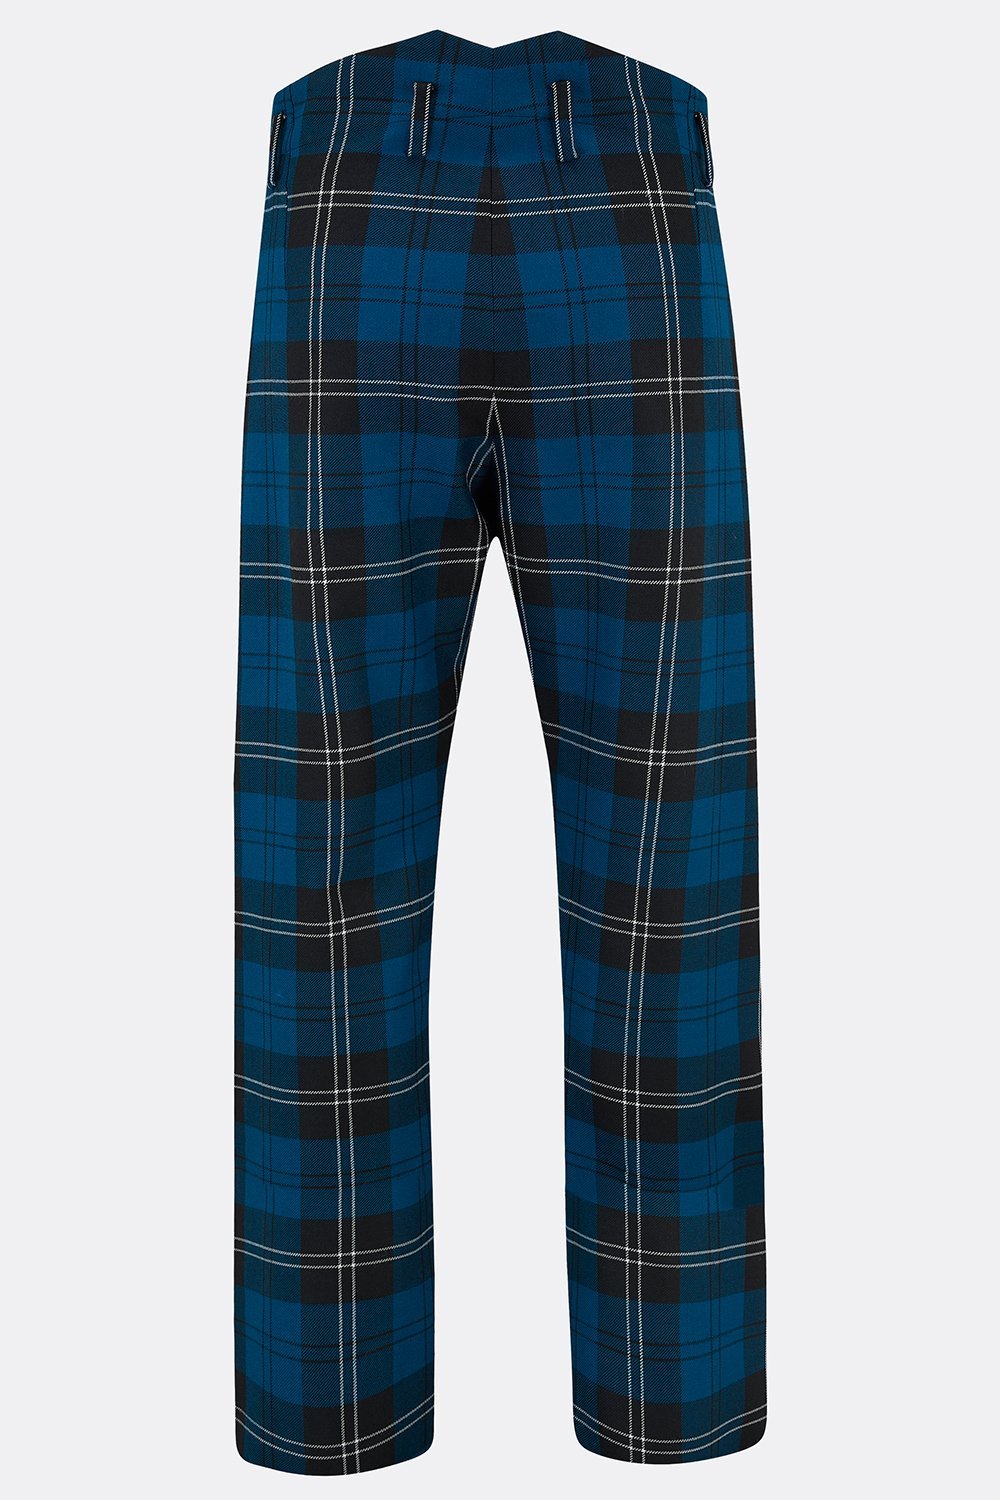 CAVALRY TROUSERS IN BLUE CHECK (made to order)-menswear-A Child Of The Jago